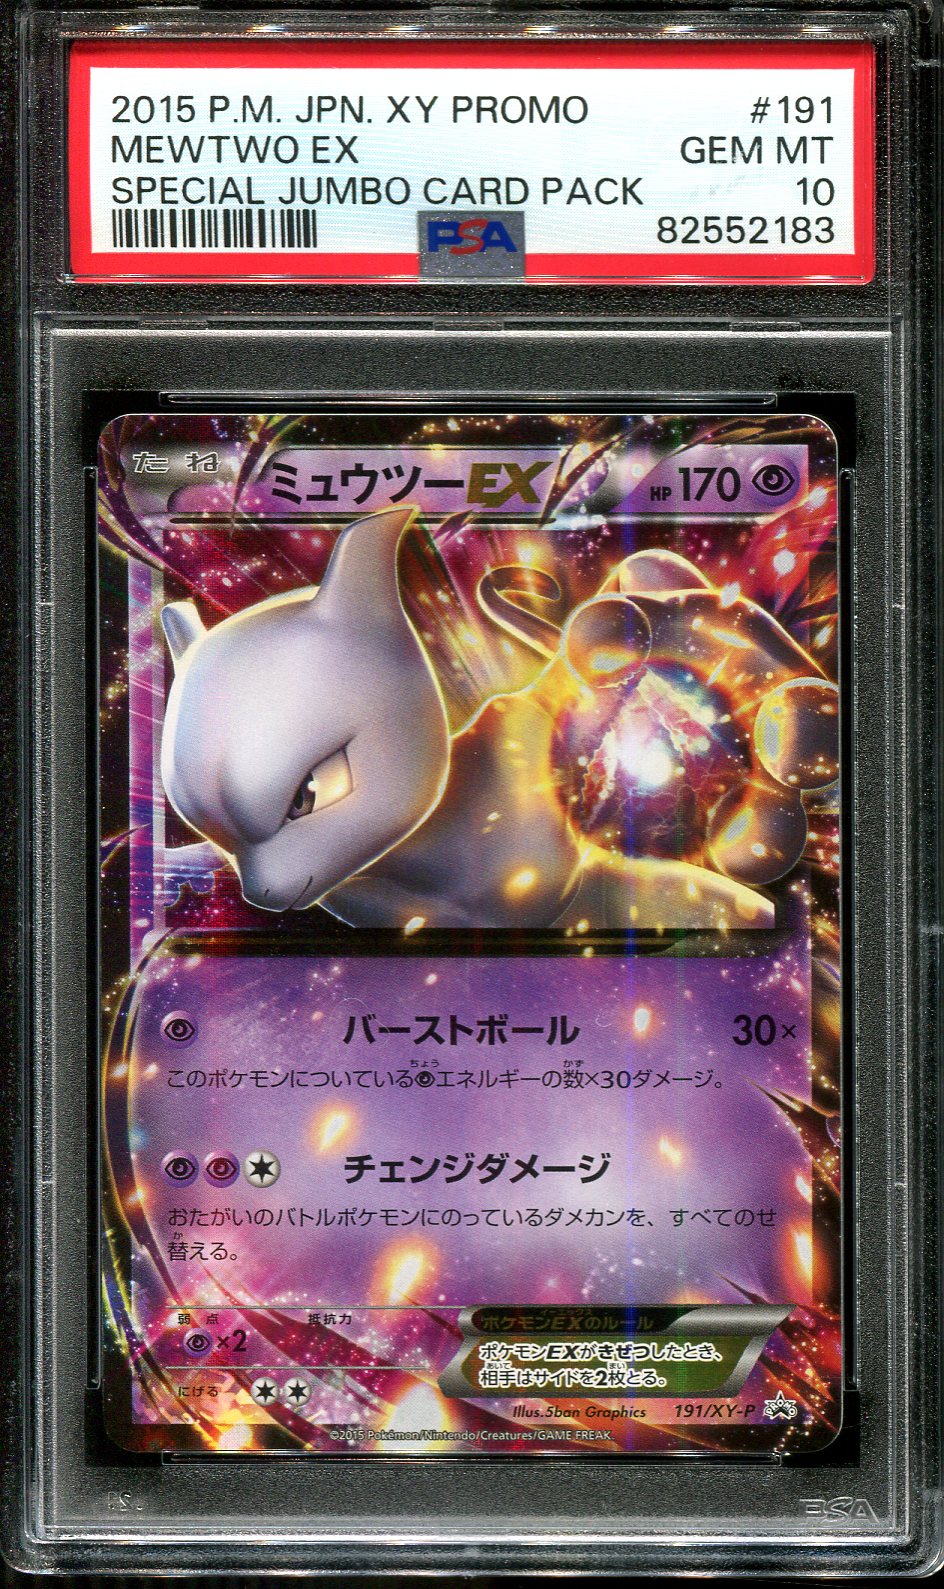 MEWTWO LV X 006/012 PSA 10 POKEMON COLLECTION PACK PtM JAPANESE HOLO